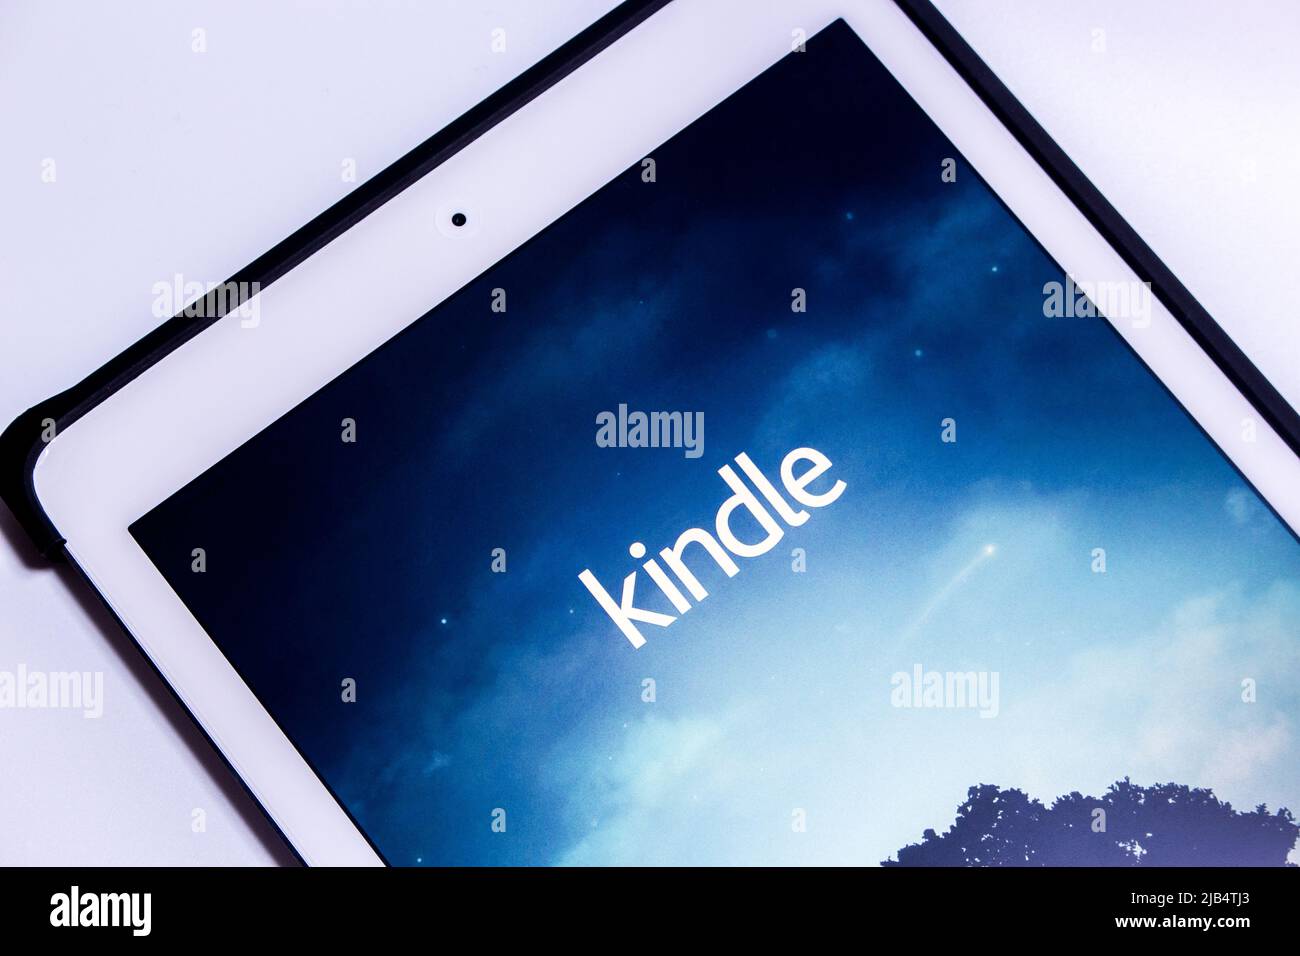 Kindle app, e-book reader by Amazon, on an iPad. From Amazon website or Kindle Store, an online e-book store by Amazon, users can purchase an e-book Stock Photo